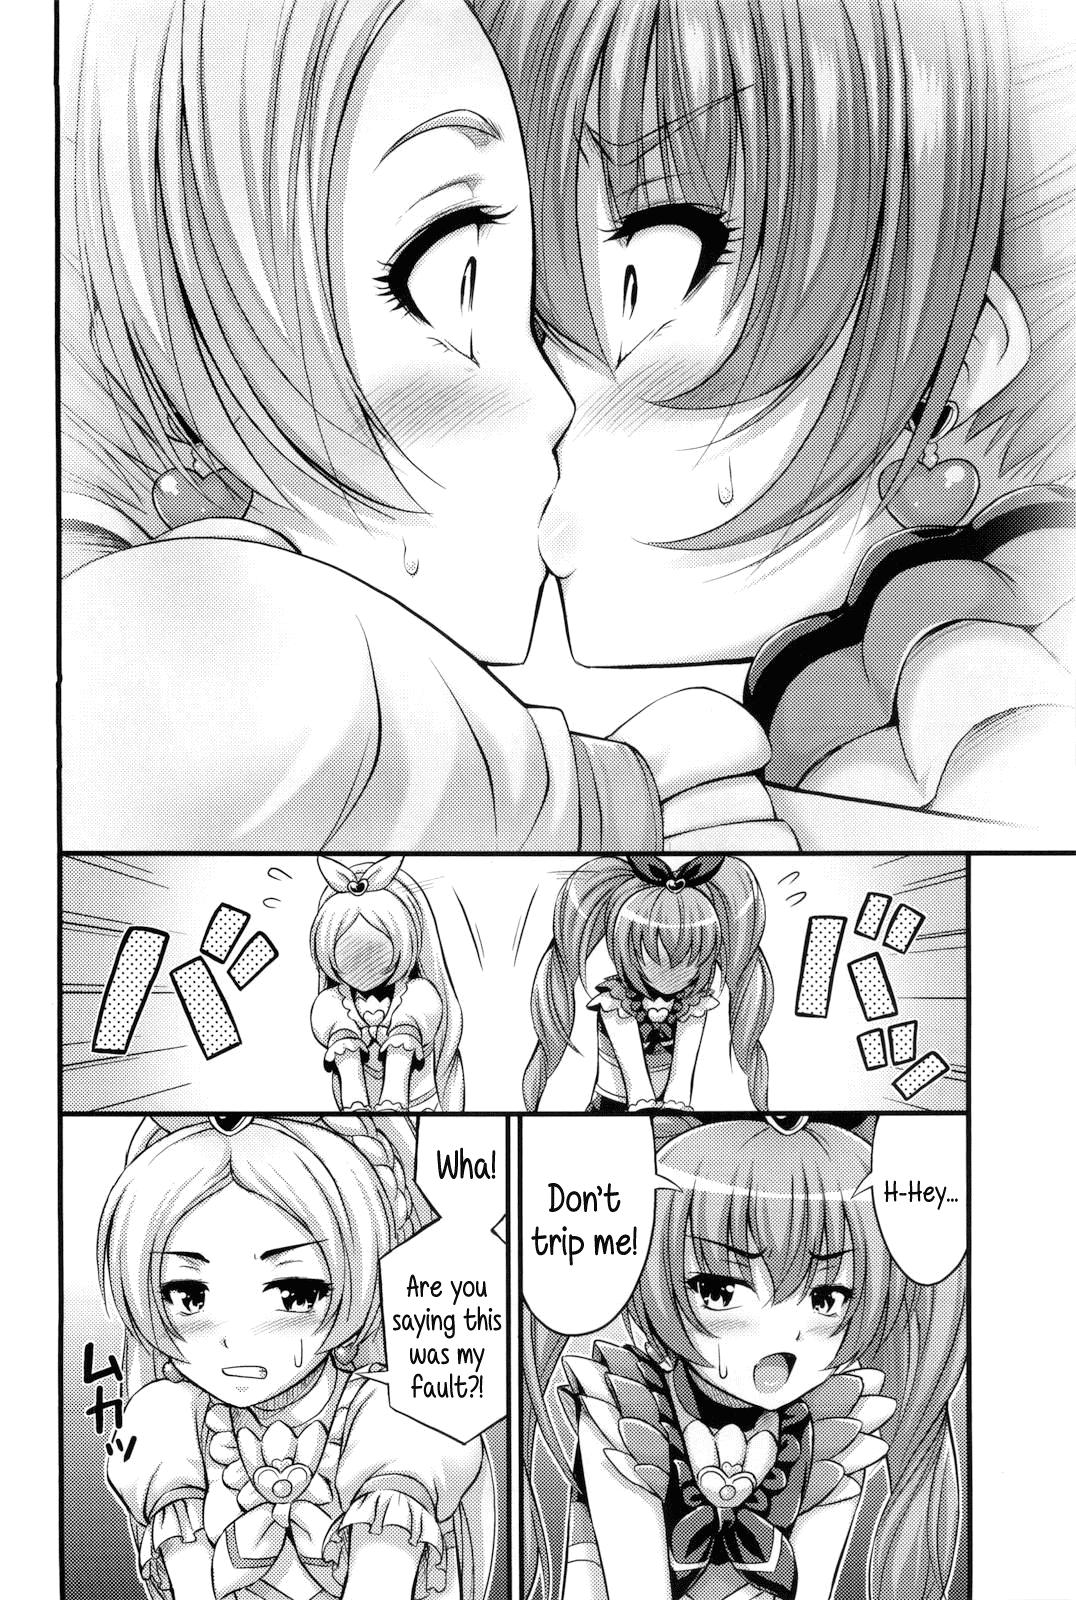 Spanking HP ga Tarinai | Our HP is lacking - Suite precure Finger - Page 3